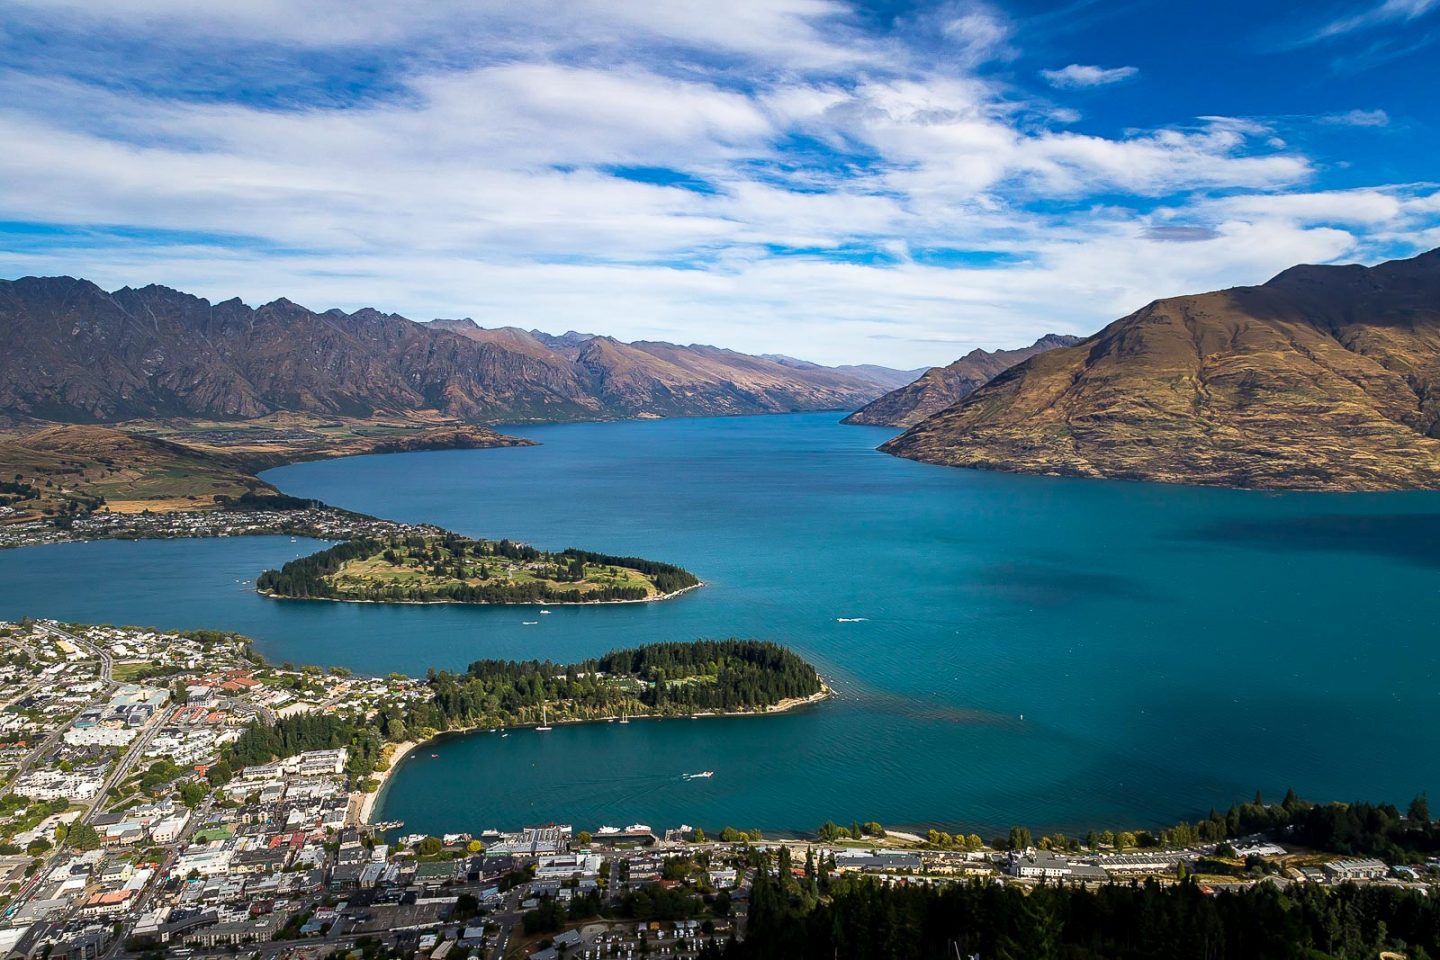 View from the Queenstown Gondola, South Island, New Zealand